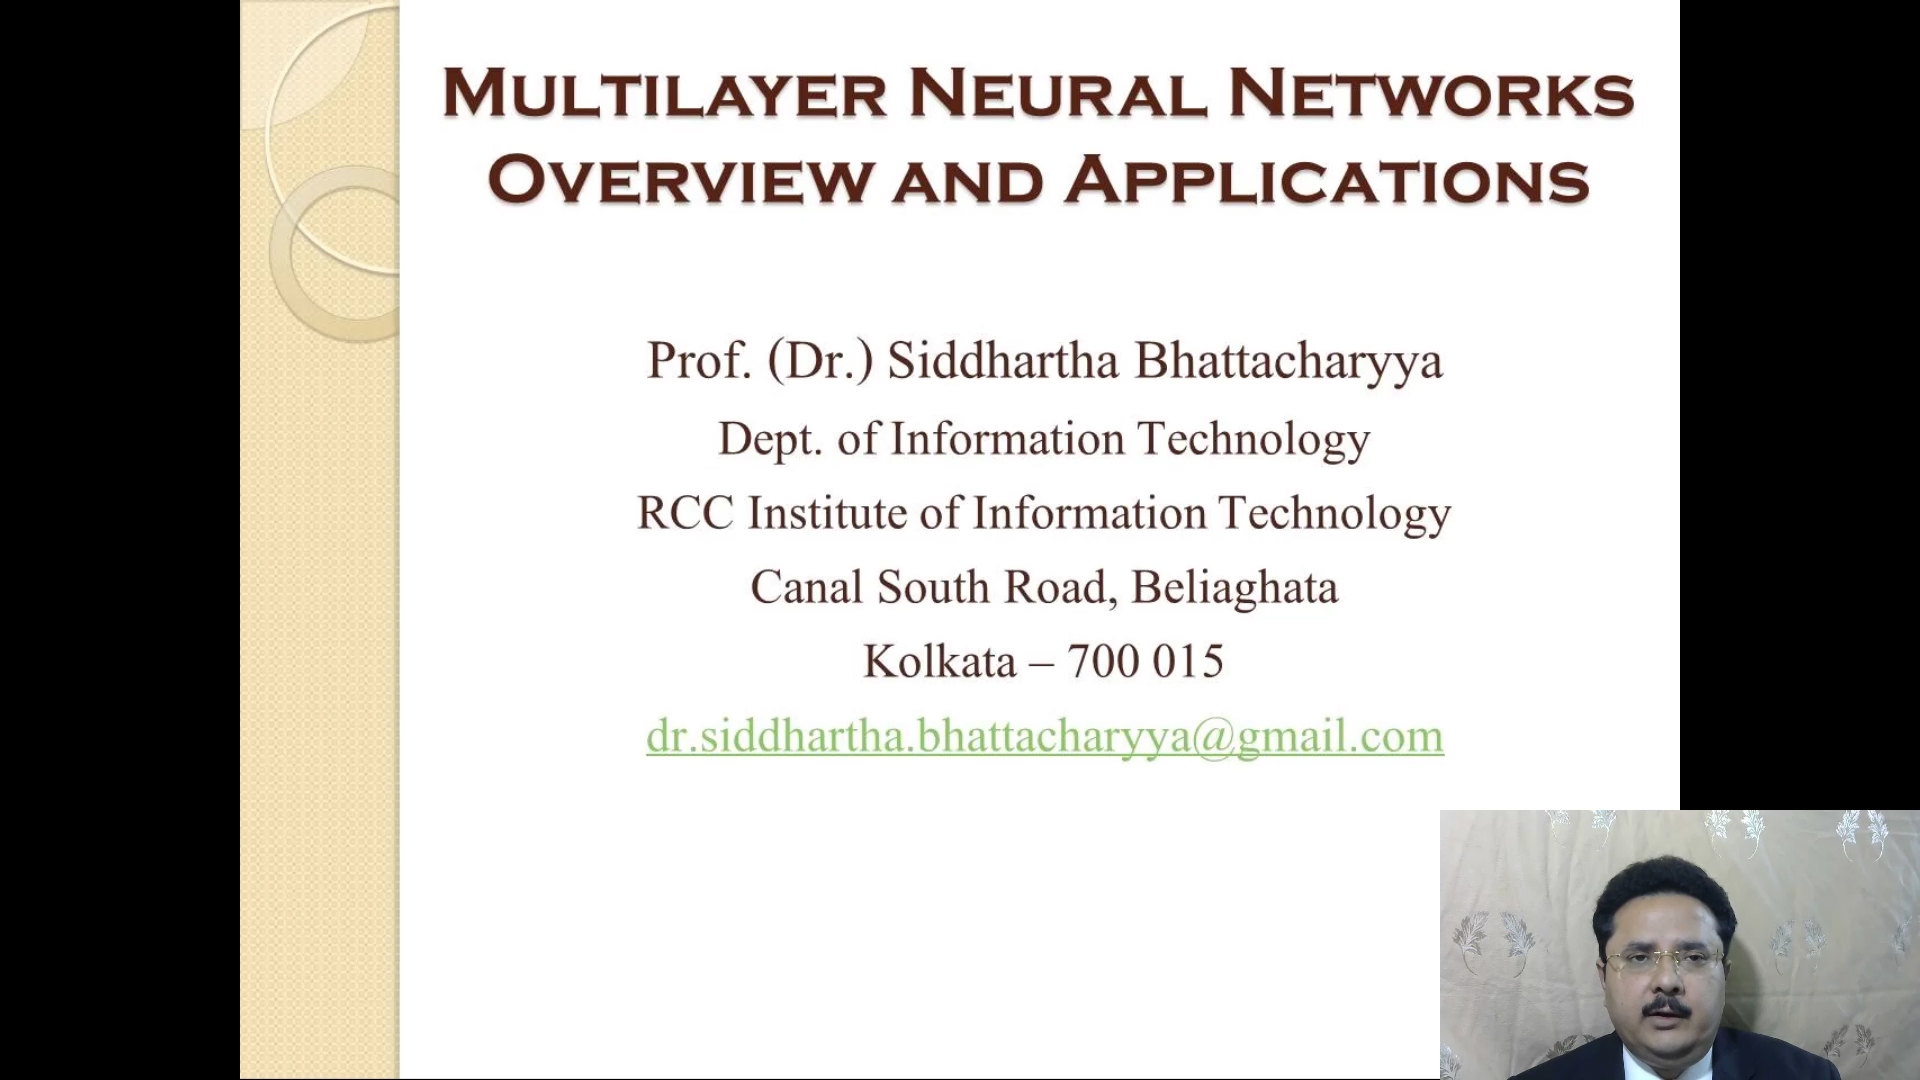 Multilayer Neural Networks: Overview and Applications